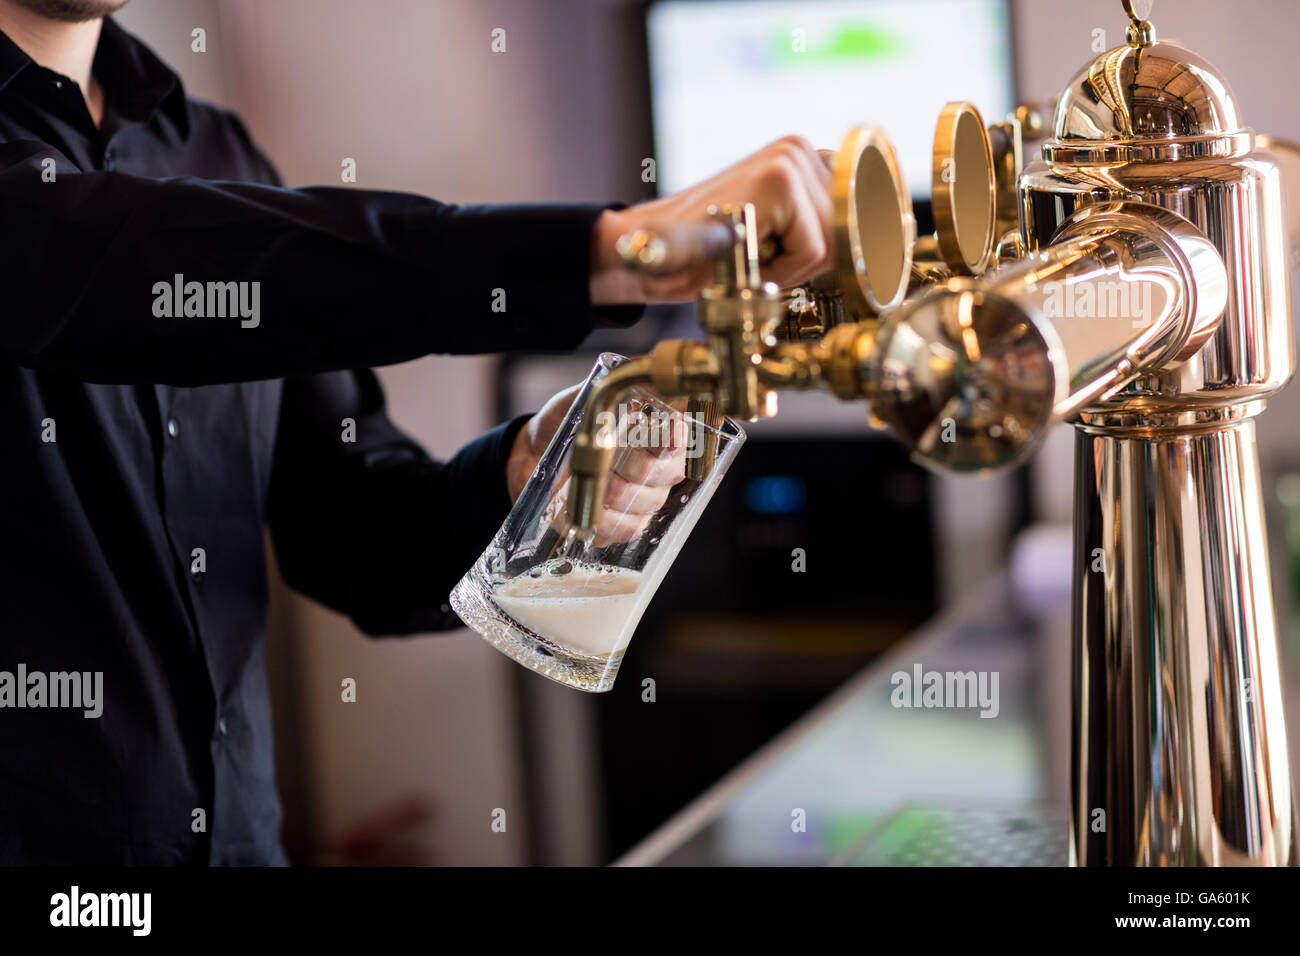 Bartender pouring beer from faucet in pint glass Stock Photo